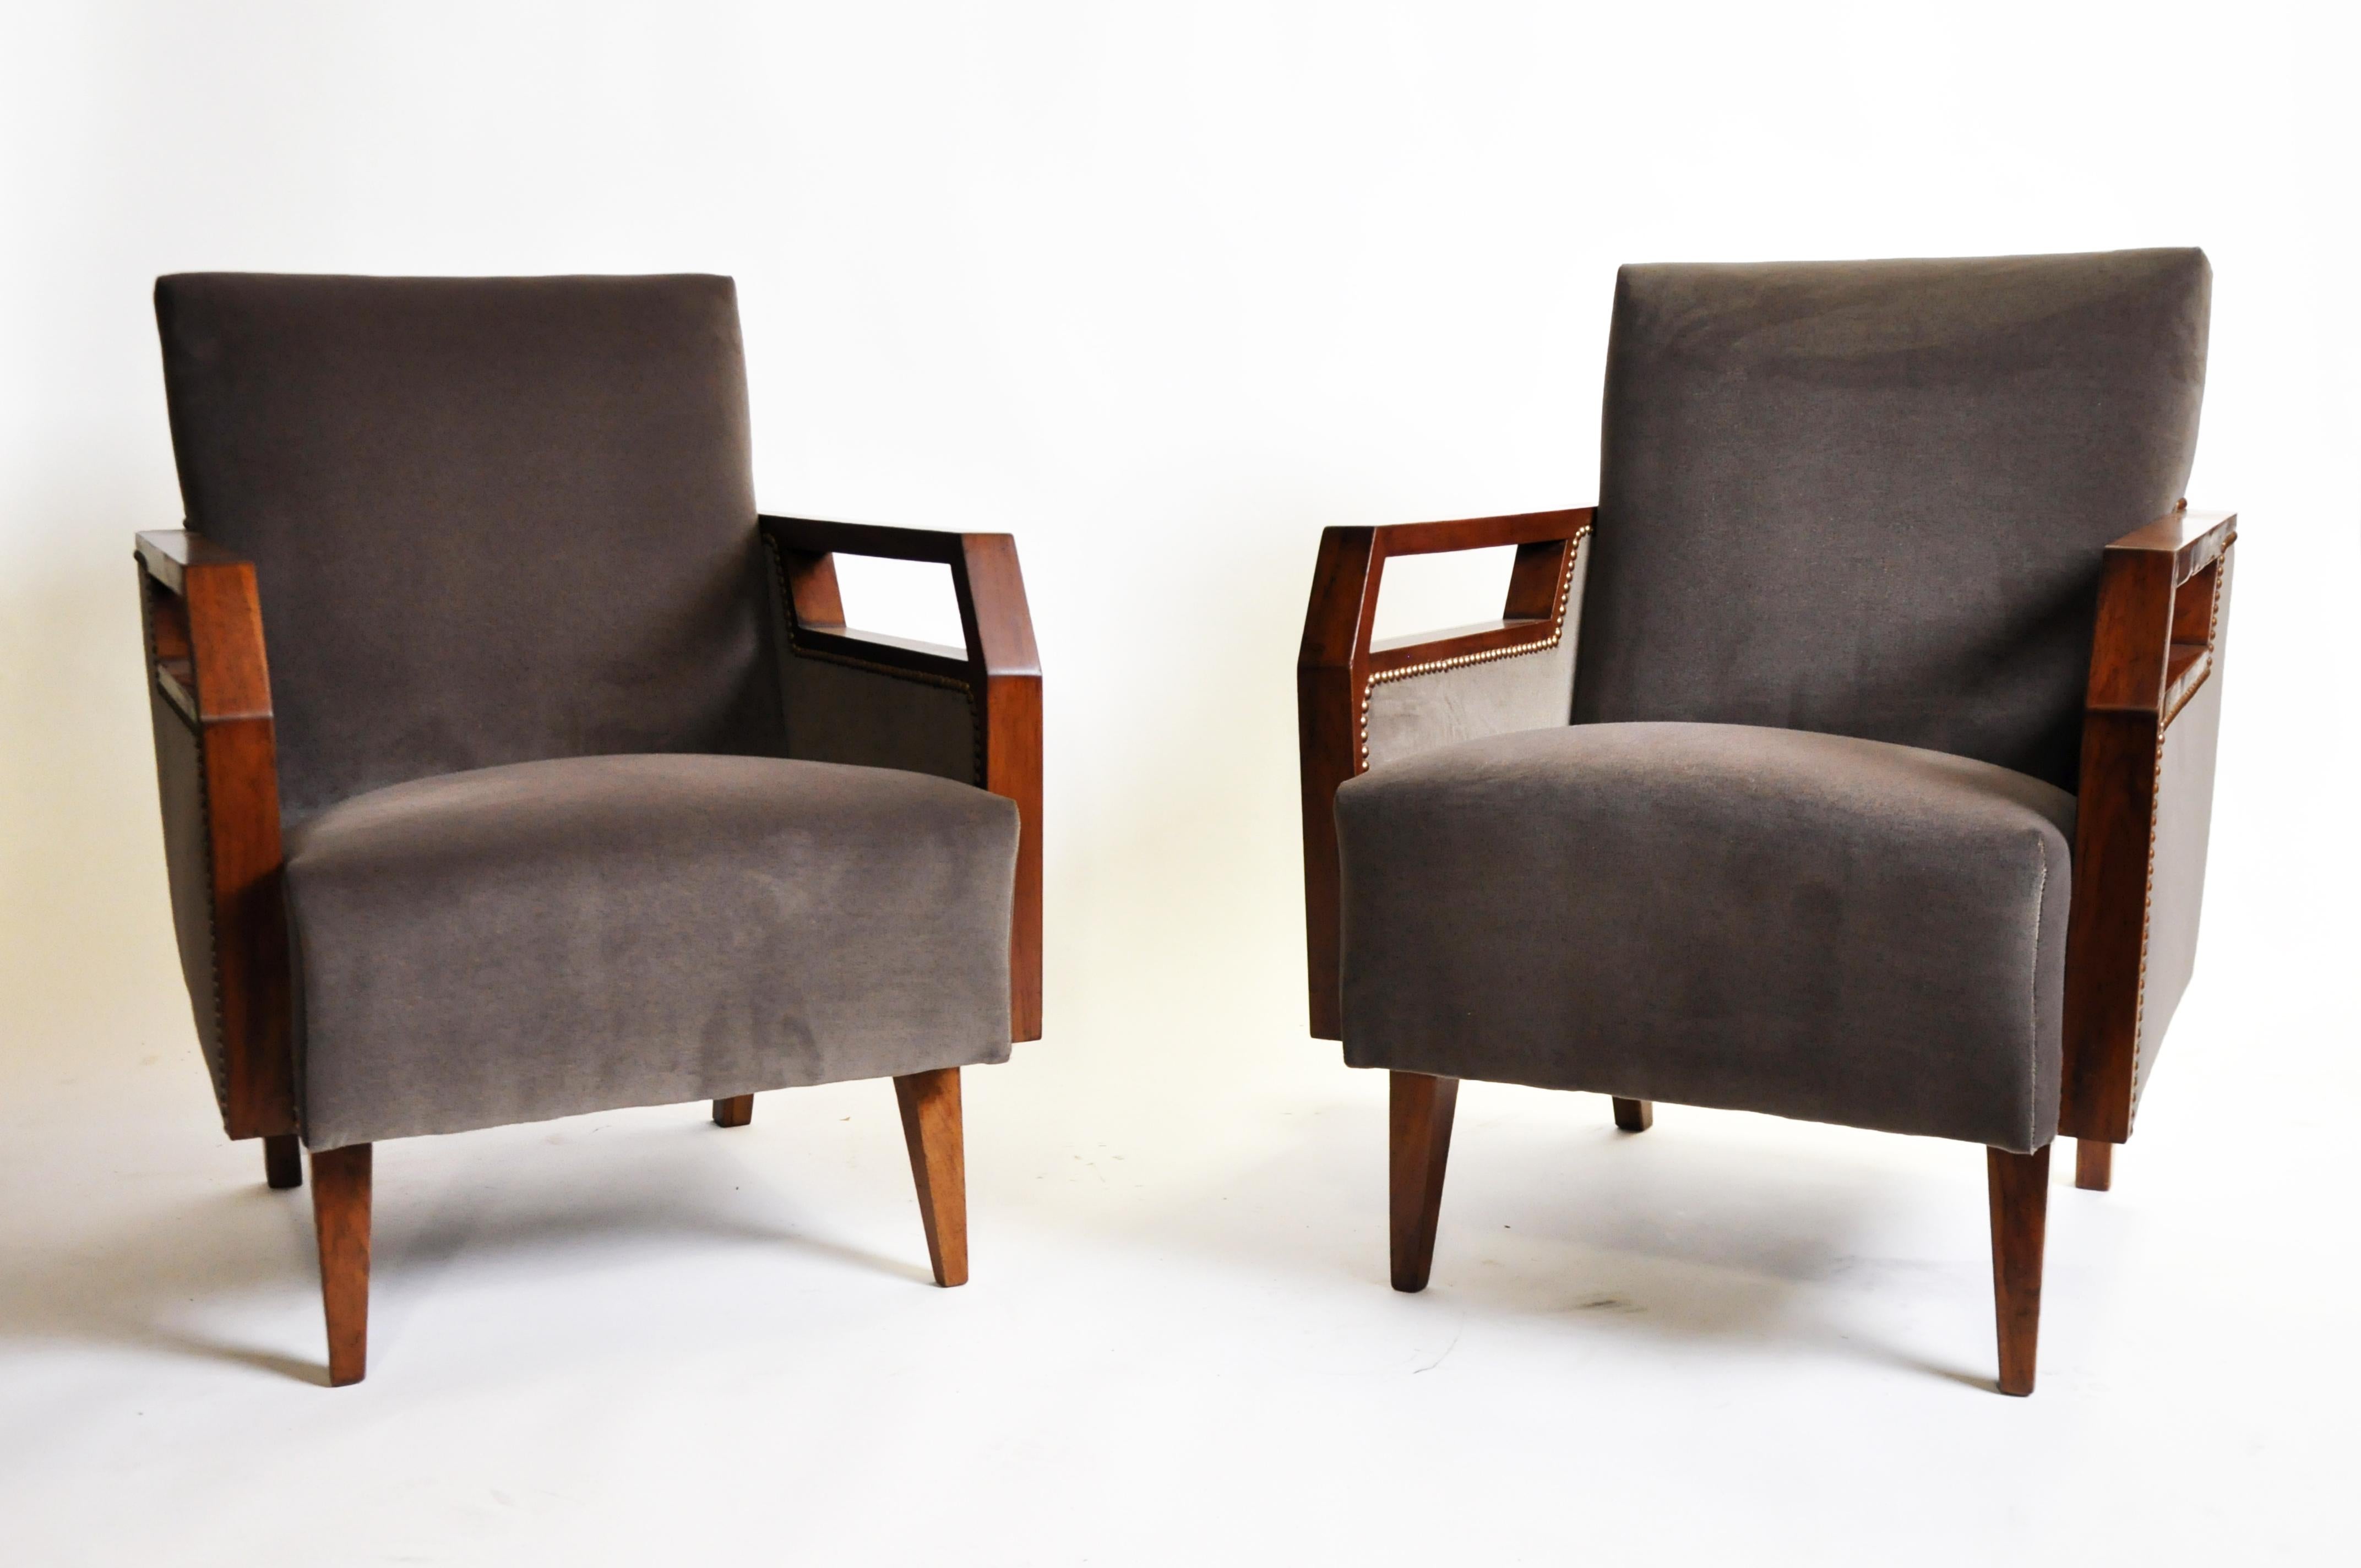 This handsome pair of Mid-Century Modern chairs are from France and made from walnut wood, circa 20th century. The chair has been reupholstered and arms have been touched up and restored as well. Strong and sturdy chairs.